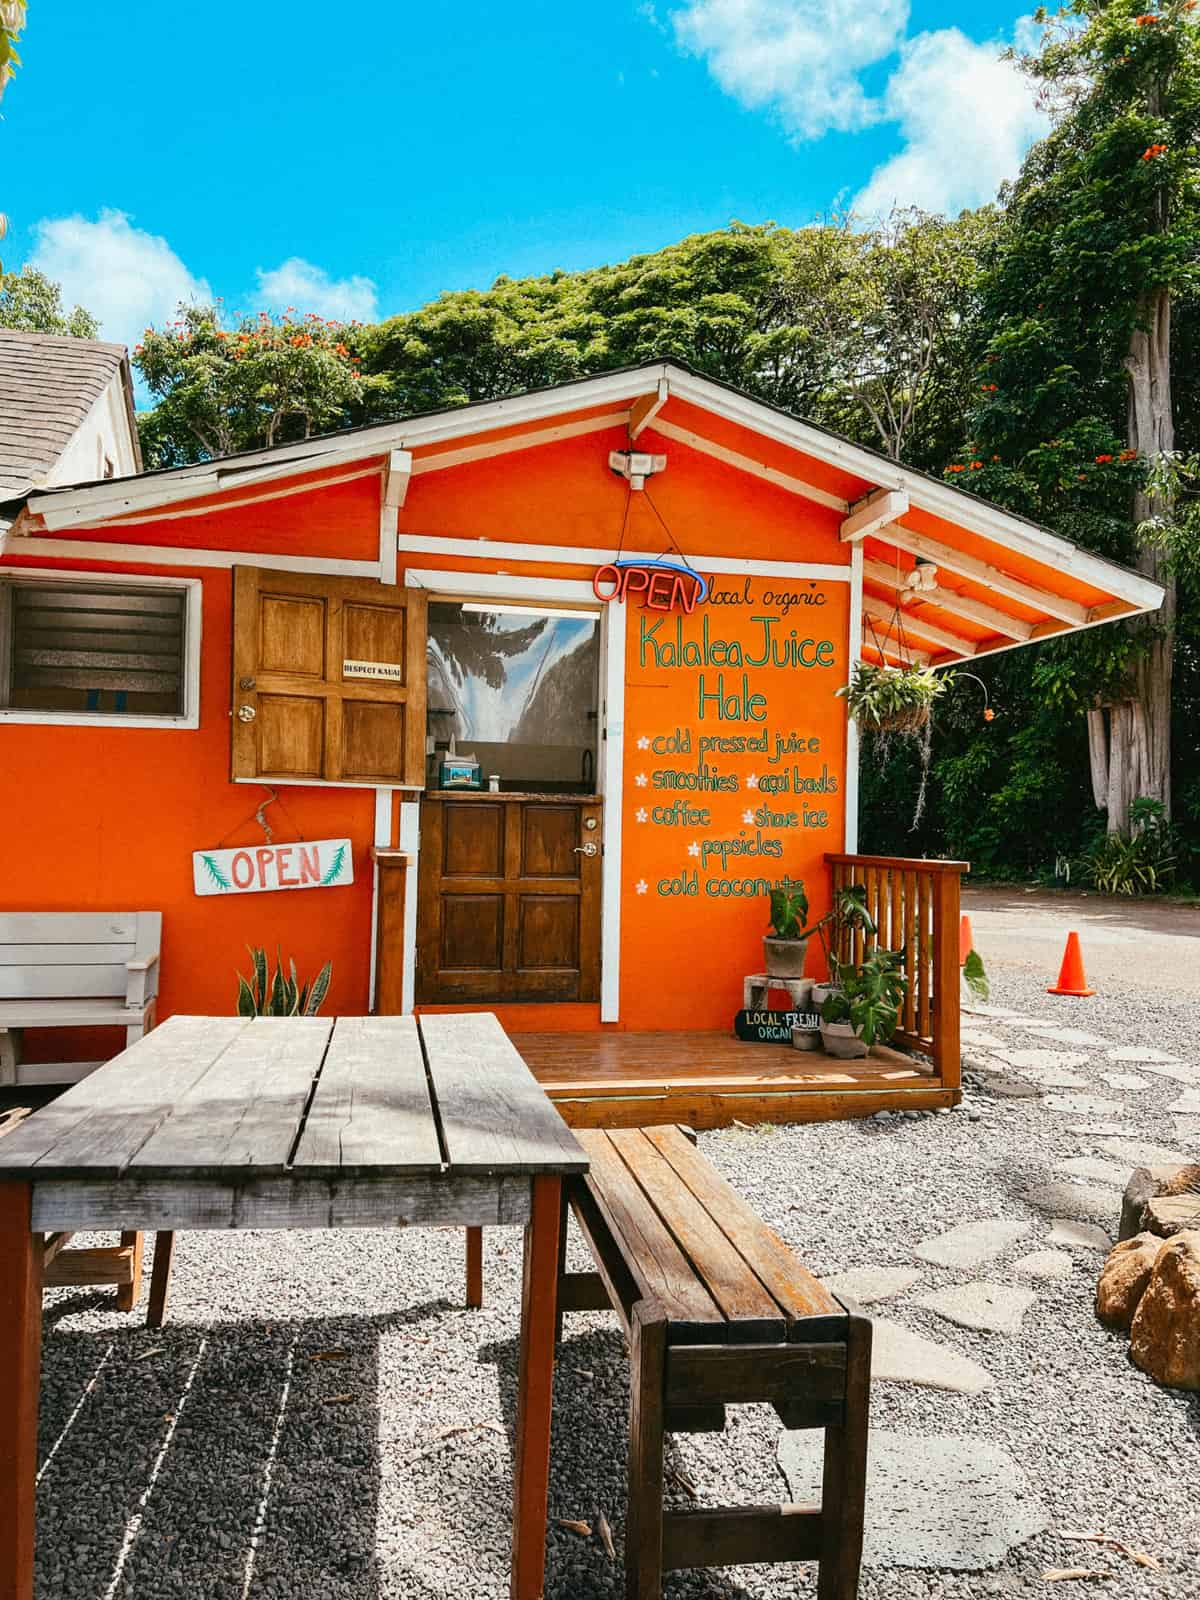 A juice shack that serves smoothies, acai bowls, coffee, and more.